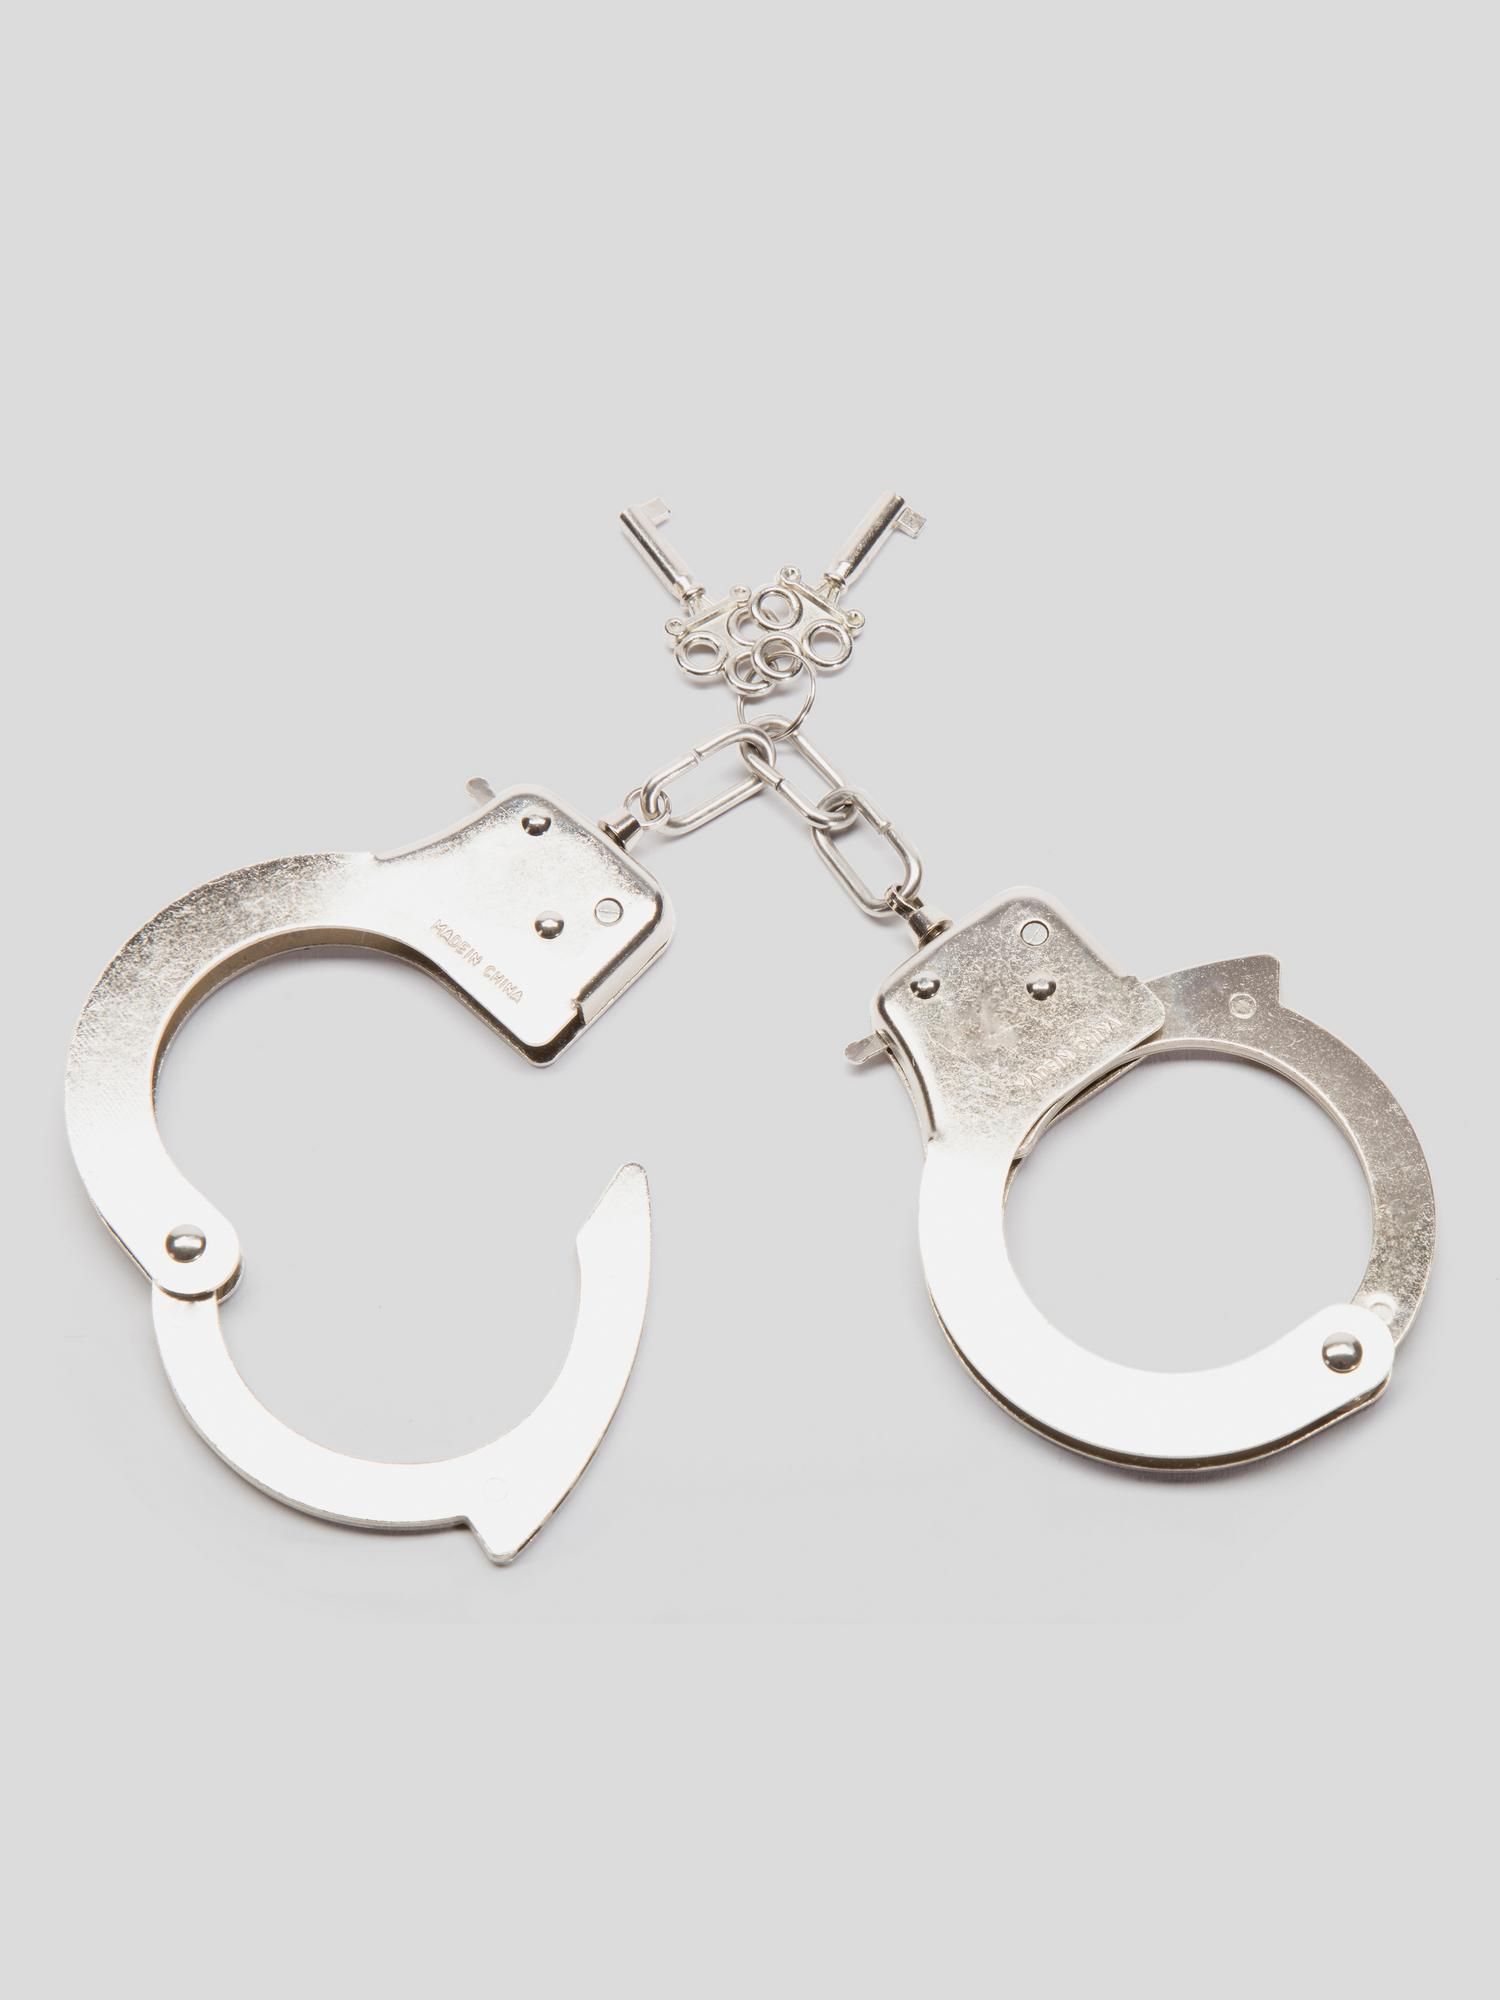 Detail Different Types Of Handcuffs Nomer 39